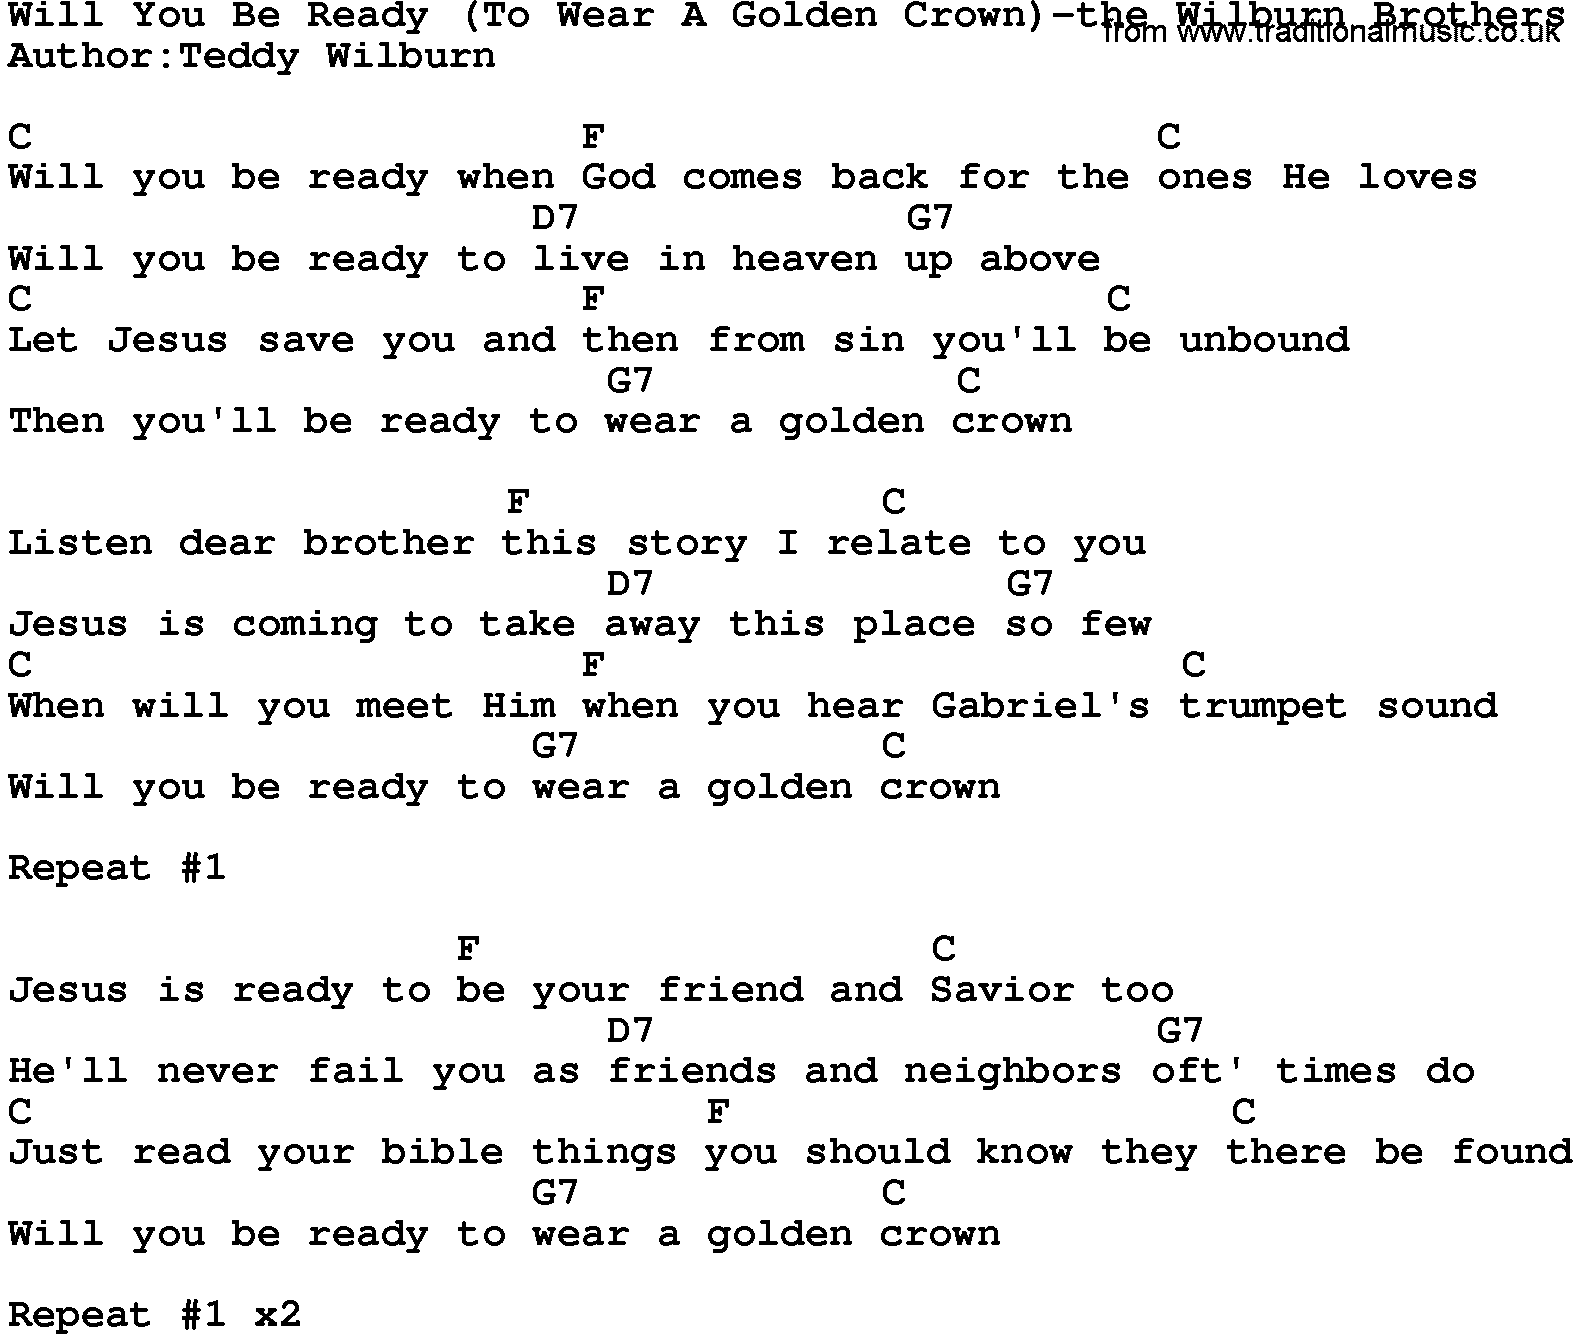 Country music song: Will You Be Ready(To Wear A Golden Crown)-The Wilburn Brothers lyrics and chords